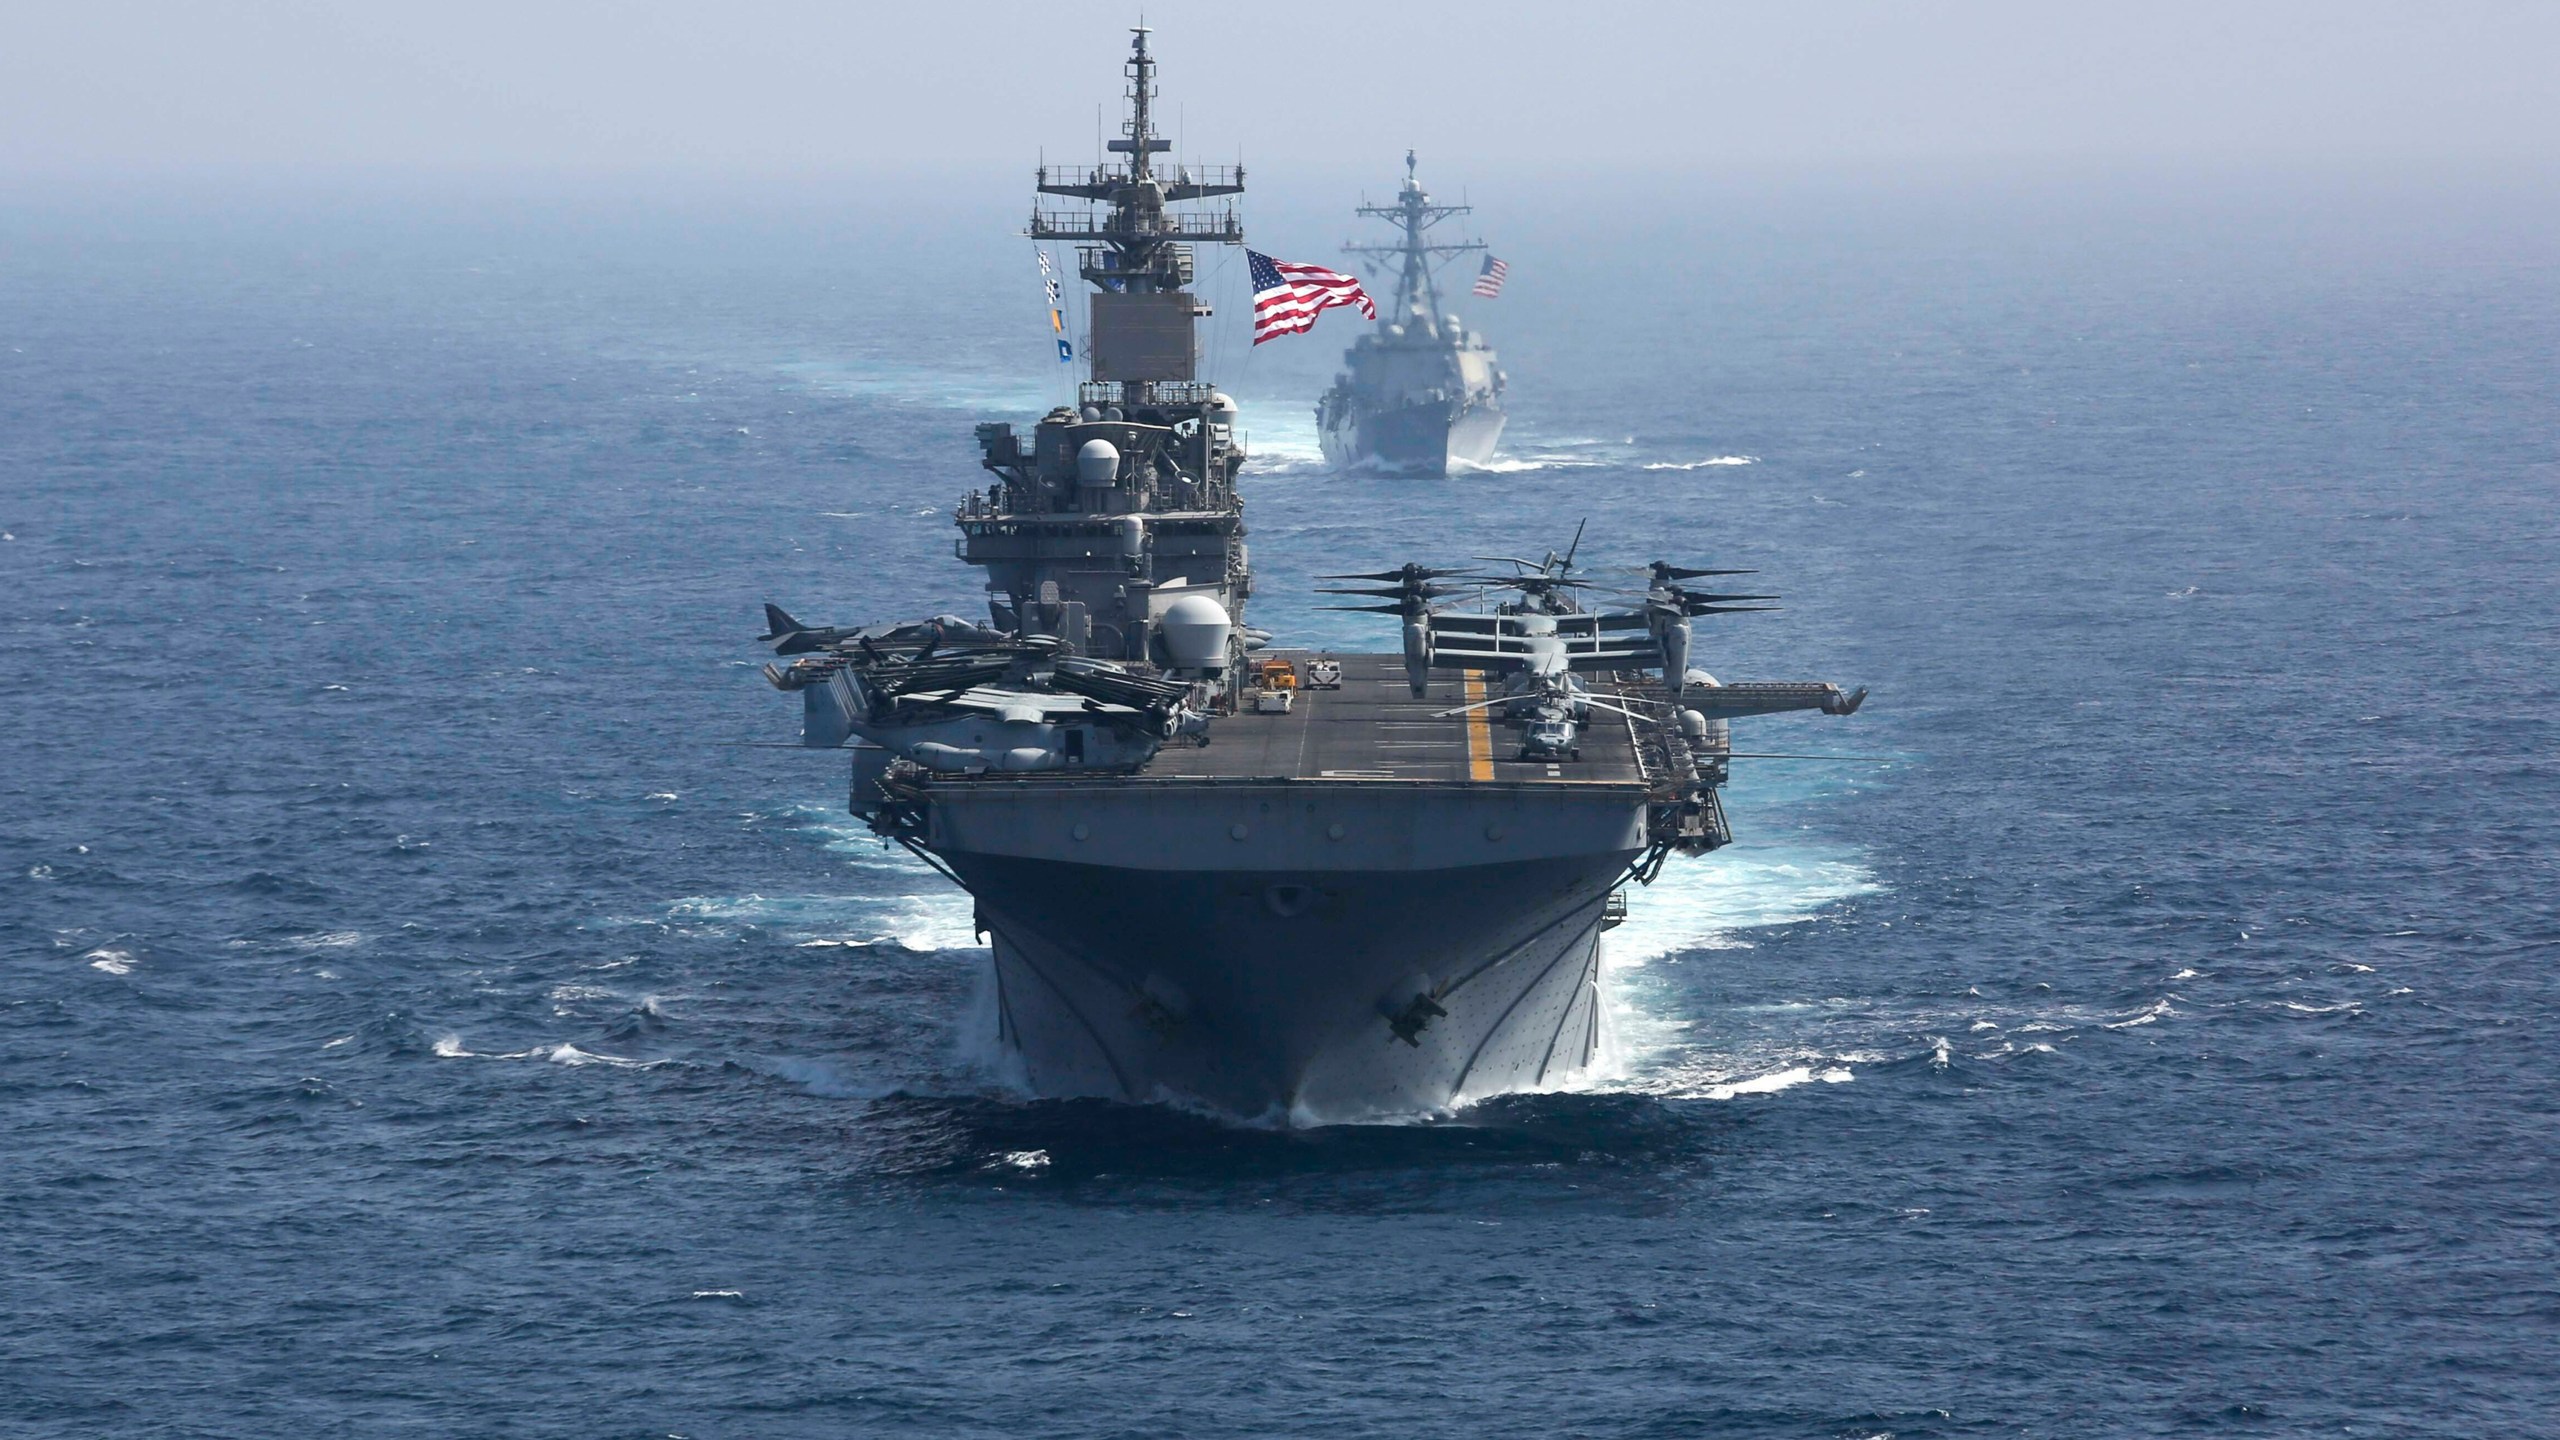 FILE - In this photo released by the U.S. Navy, the amphibious assault ship USS Kearsarge and the Arleigh Burke-class guided-missile destroyer USS Bainbridge sail in formation as part of the USS Abraham Lincoln aircraft carrier strike group in the Arabian Sea. President Joe Biden has chosen Adm. Lisa Franchetti to lead the Navy, a senior administration official said Friday, July 21, 2023. If confirmed, she would be the first woman to be a U.S. military service chief. (Mass Communication Specialist 1st Class Brian M. Wilbur, U.S. Navy via AP, File)